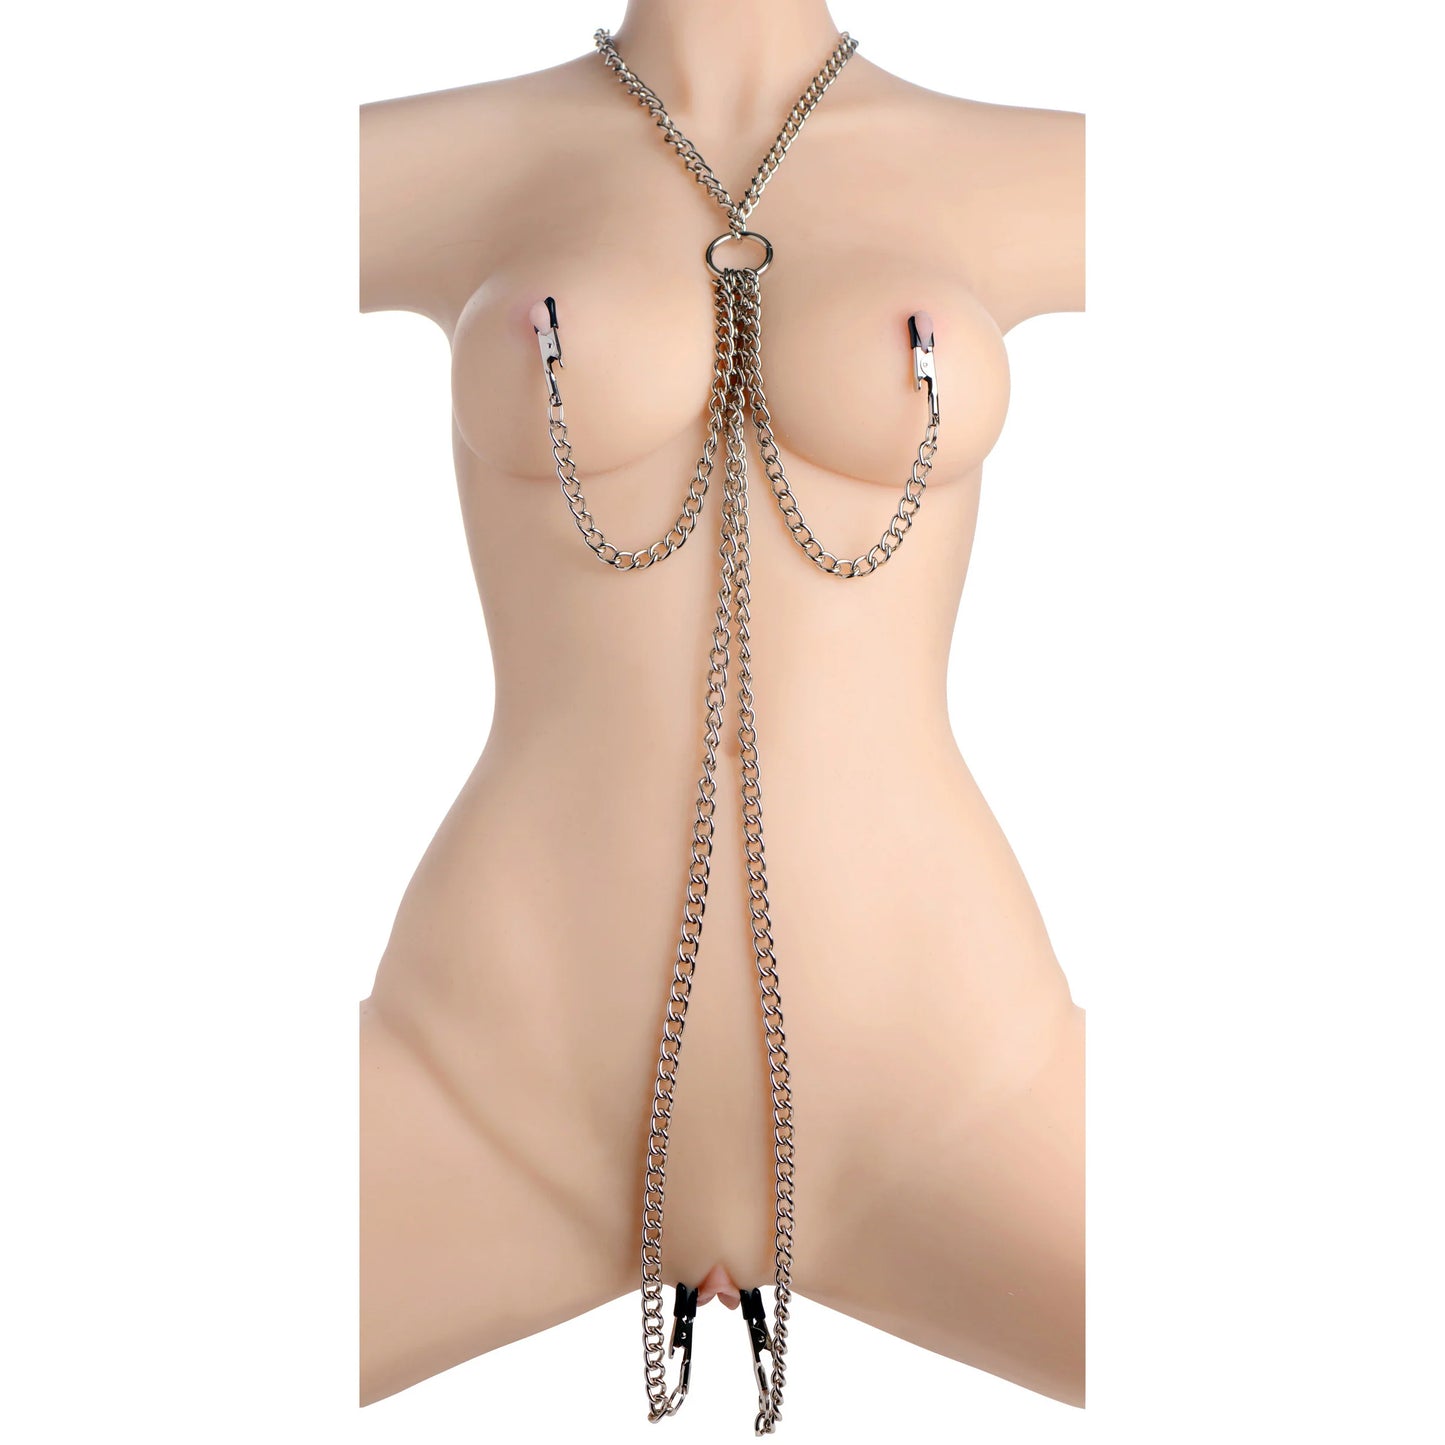 Master Series Collar Nipple and Clit Clamp Set